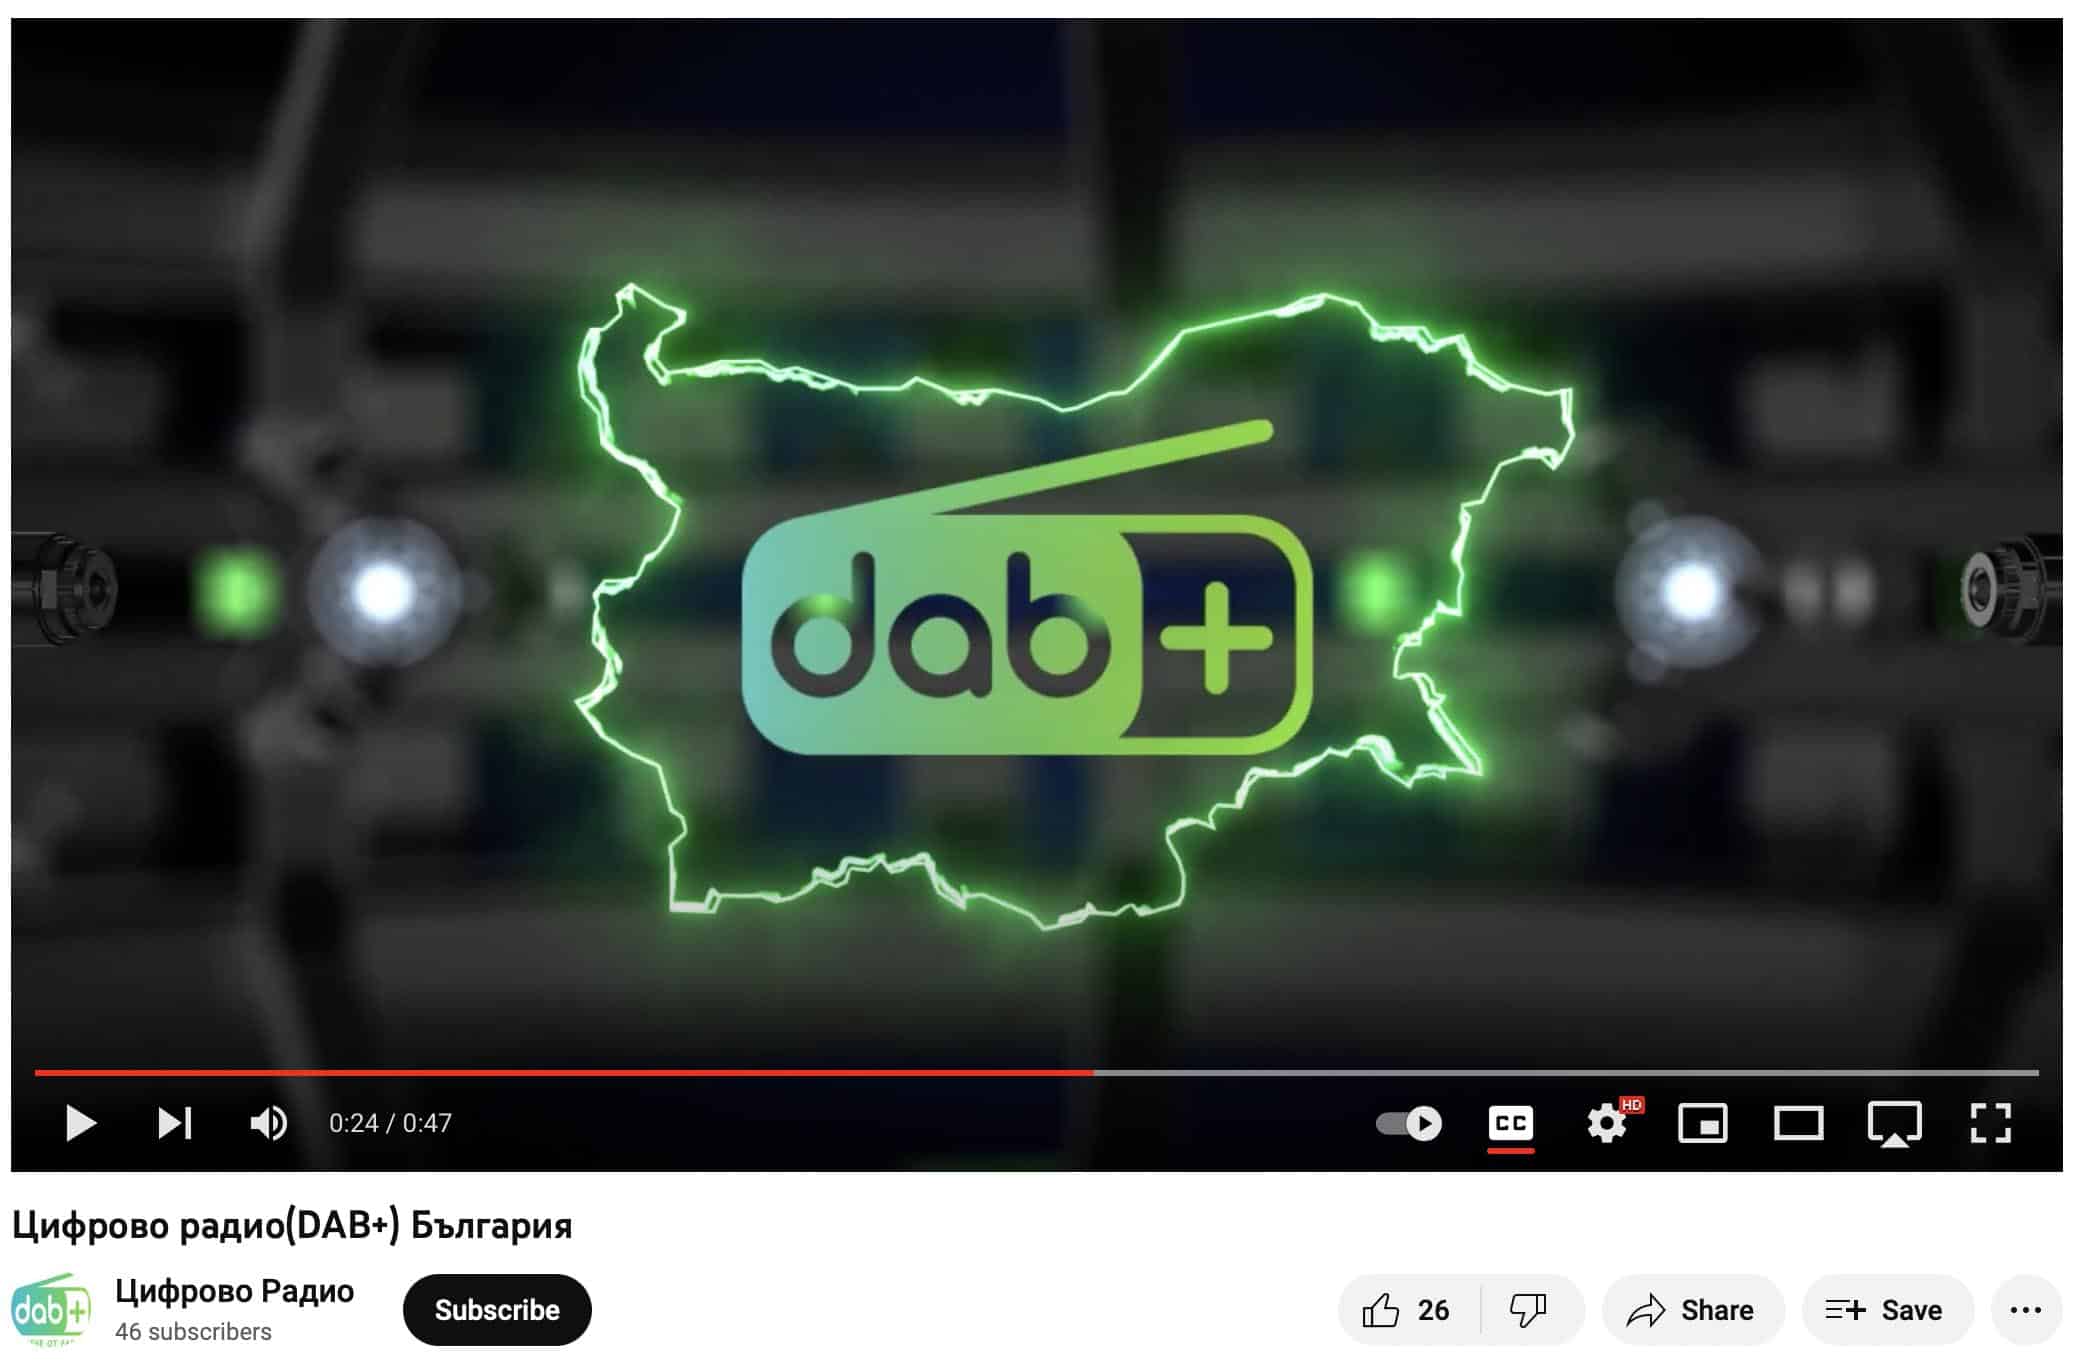 YouTube video for DAB+ in Switzerland